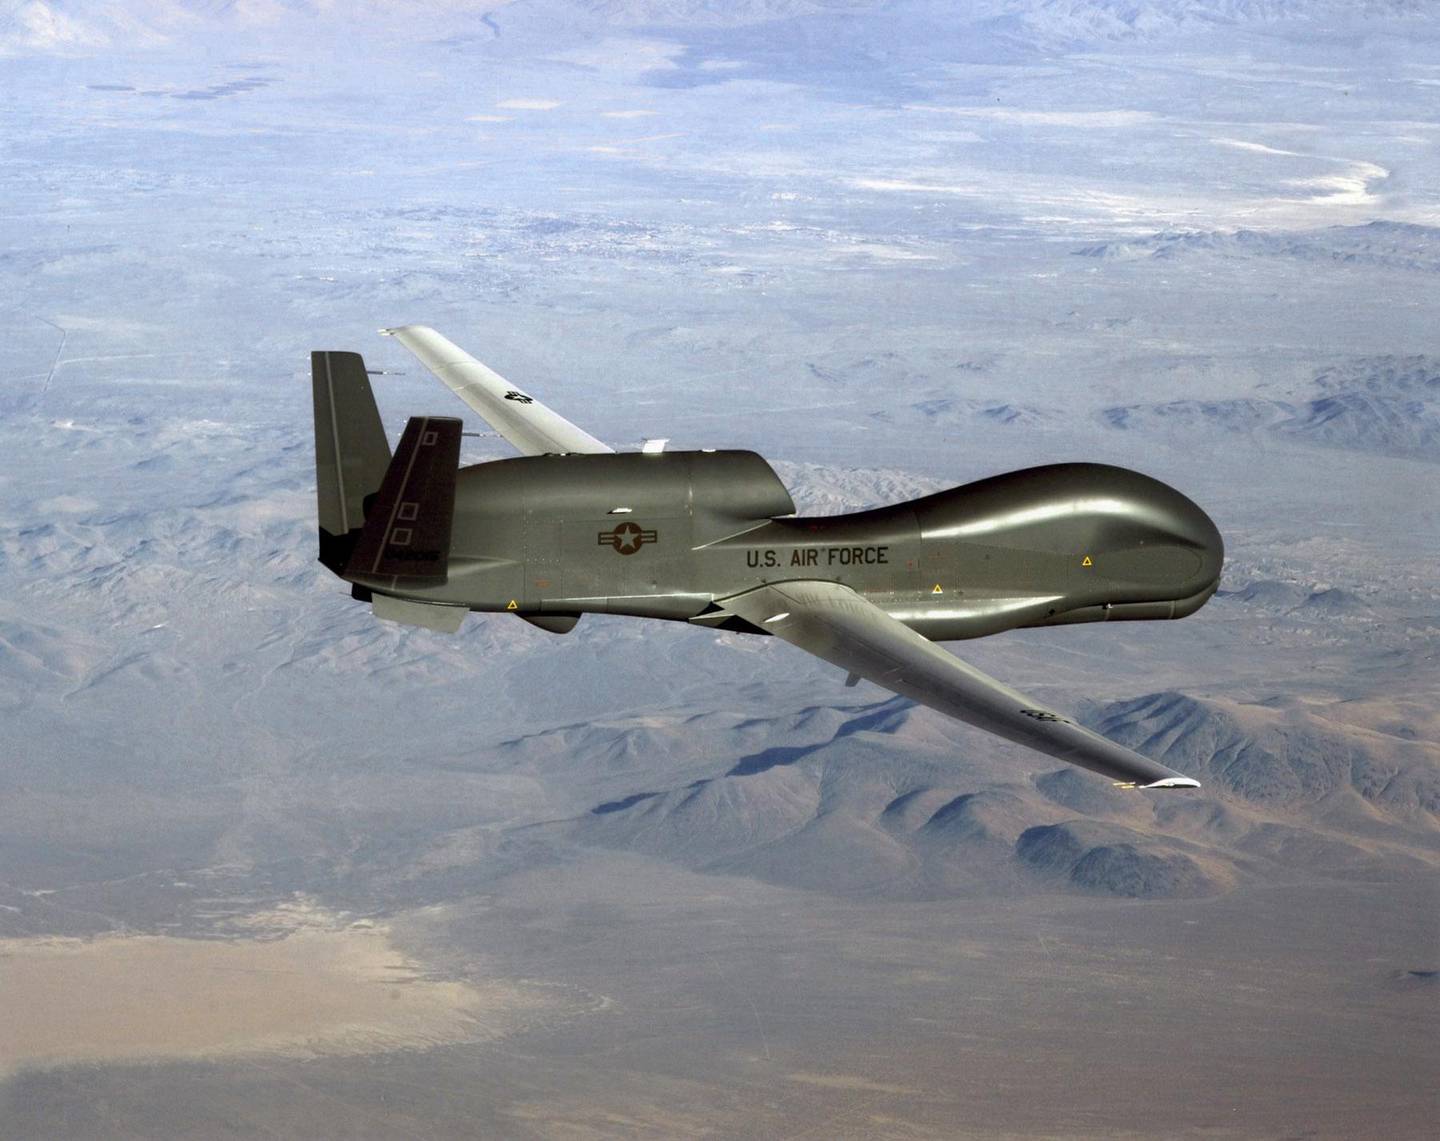 TOPSHOT - This undated US Air Force file photo released on June 20, 2019 shows a photo of a RQ-4 Global Hawk unmanned surveillance and reconnaissance aircraft. - A US spy drone was some 34 kilometers (21 miles) from the nearest point in Iran when it was shot down over the Strait of Hormuz by an Iranian surface-to-air missile June 20, 2019, a US general said. "This dangerous and escalatory attack was irresponsible and occurred in the vicinity of established air corridors between Dubai, UAE, and Oman, possibly endangering innocent civilians," said Lieutenant General Joseph Guastella, who commands US air forces in the region."At the time of the intercept the RQ-4 was at high altitude, approximately 34 kilometers from the nearest point of land on the Iranian coast," he said, over a video to the Pentagon press briefing room. (Photo by Handout / US AIR FORCE / AFP) / RESTRICTED TO EDITORIAL USE - MANDATORY CREDIT "AFP PHOTO / US AIR FORCE/HANDOUT" - NO MARKETING - NO ADVERTISING CAMPAIGNS - DISTRIBUTED AS A SERVICE TO CLIENTS